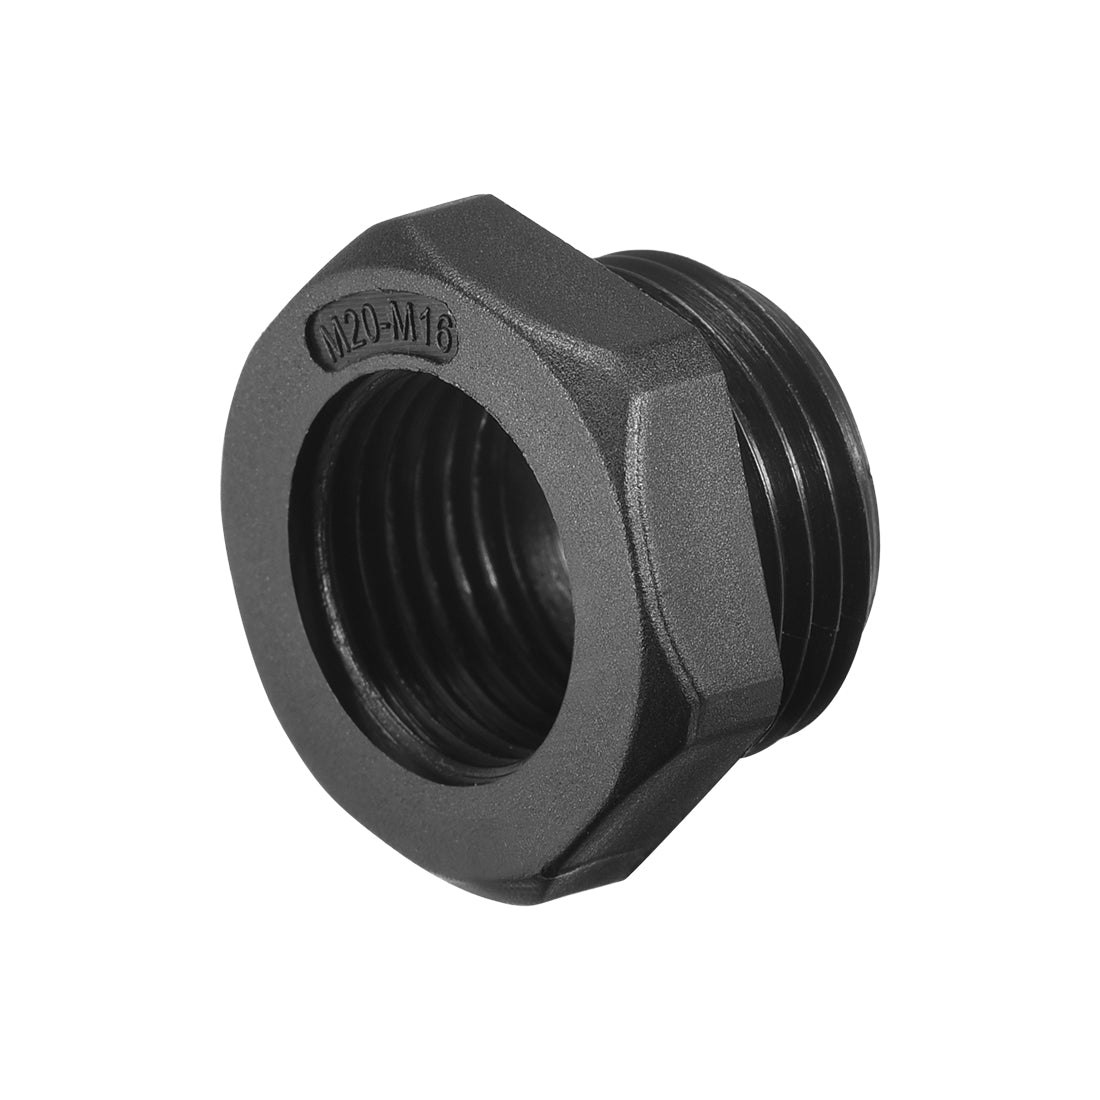 uxcell Uxcell Threaded Reducing Bushings Nylon Connector Adaptor M20 Male Thread to M16 Female Thread Black